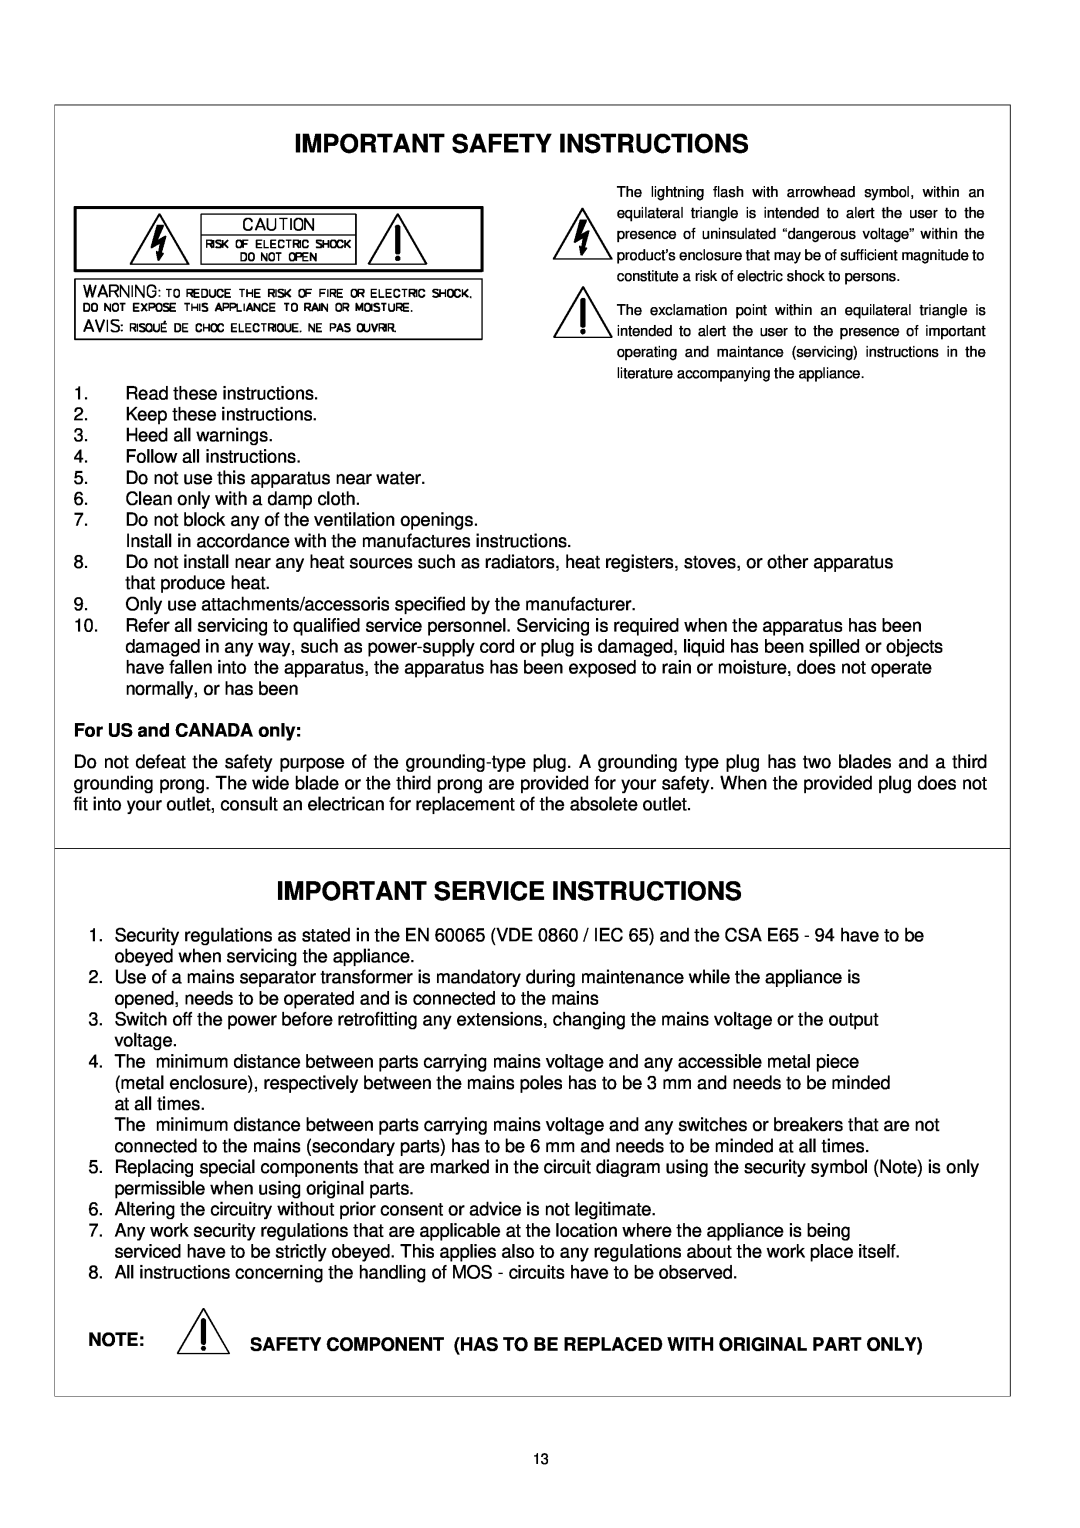 Dynacord DPP 4004, DPP 4012 Important Safety Instructions, Important Service Instructions, For US and CANADA only 